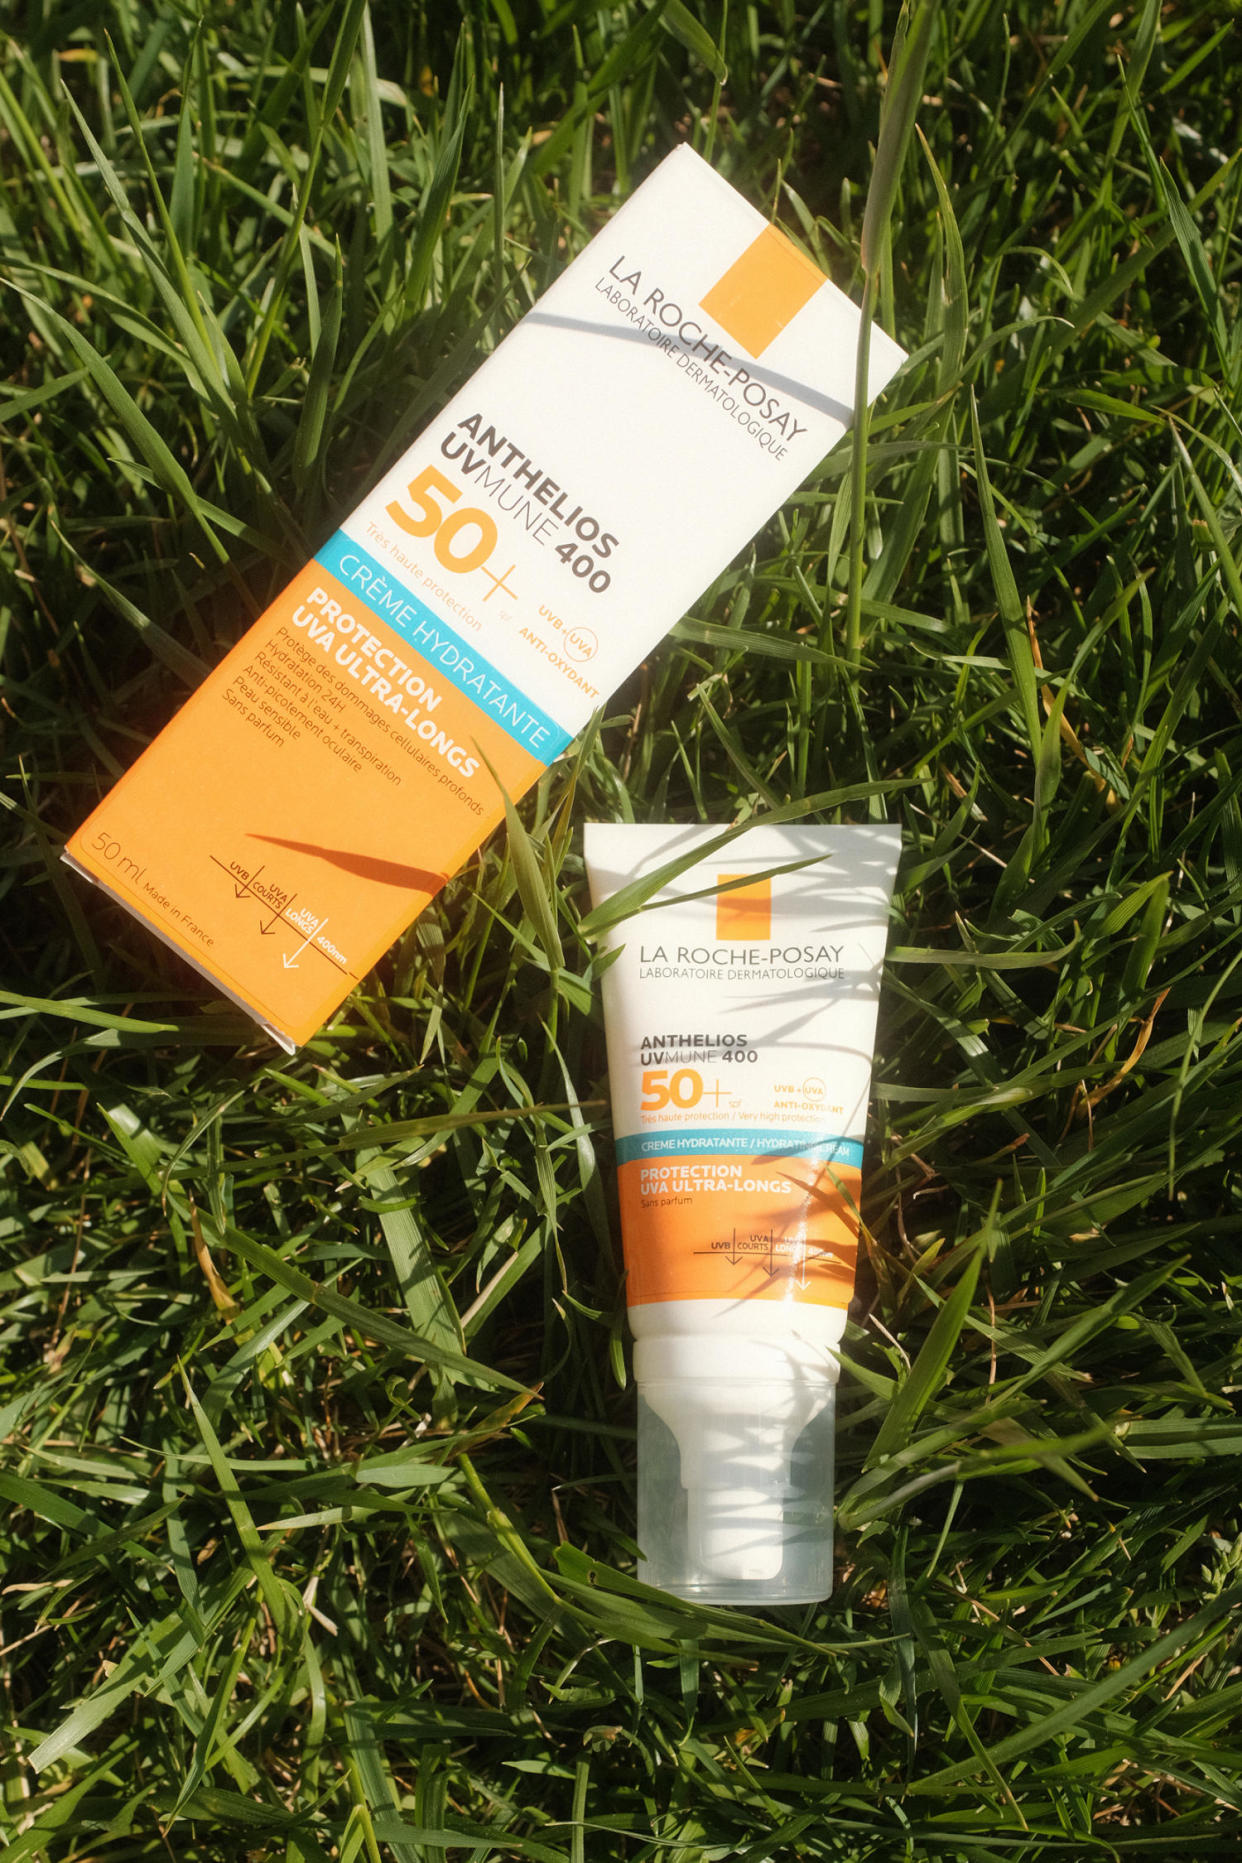 A bottle of sunscreen and its box lay in grass in the sun. (Chelsea Stahl and Elise Wrabetz / NBC News)